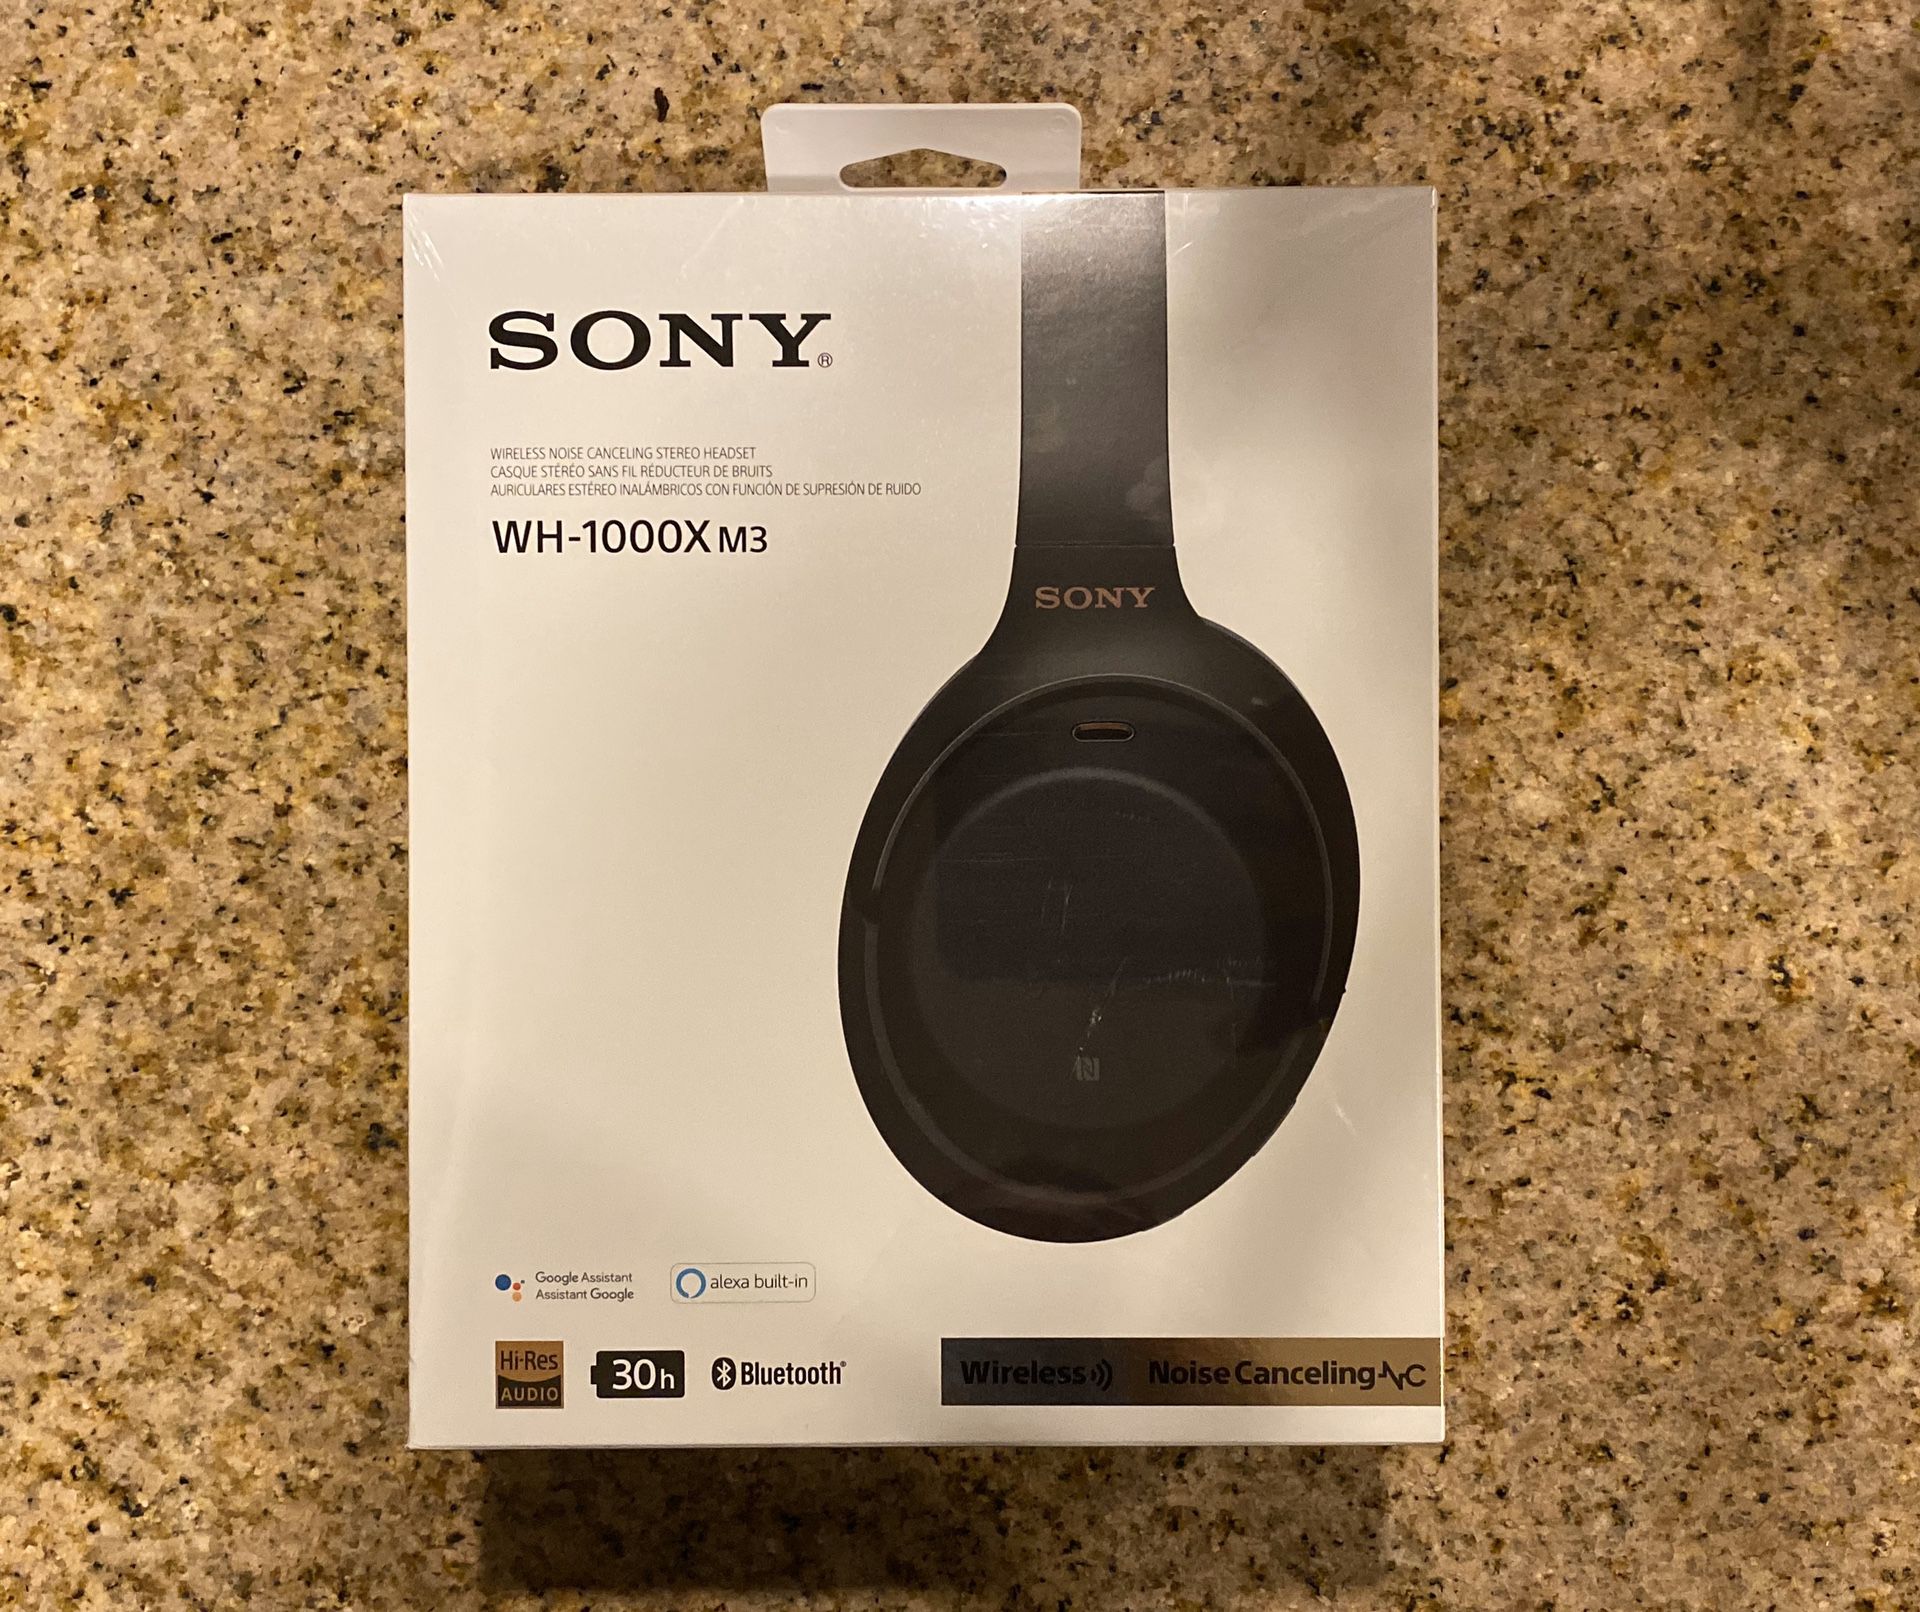 SONY WH-1000XM3 Noise Cancelling Headphones - BRAND NEW UNOPENED